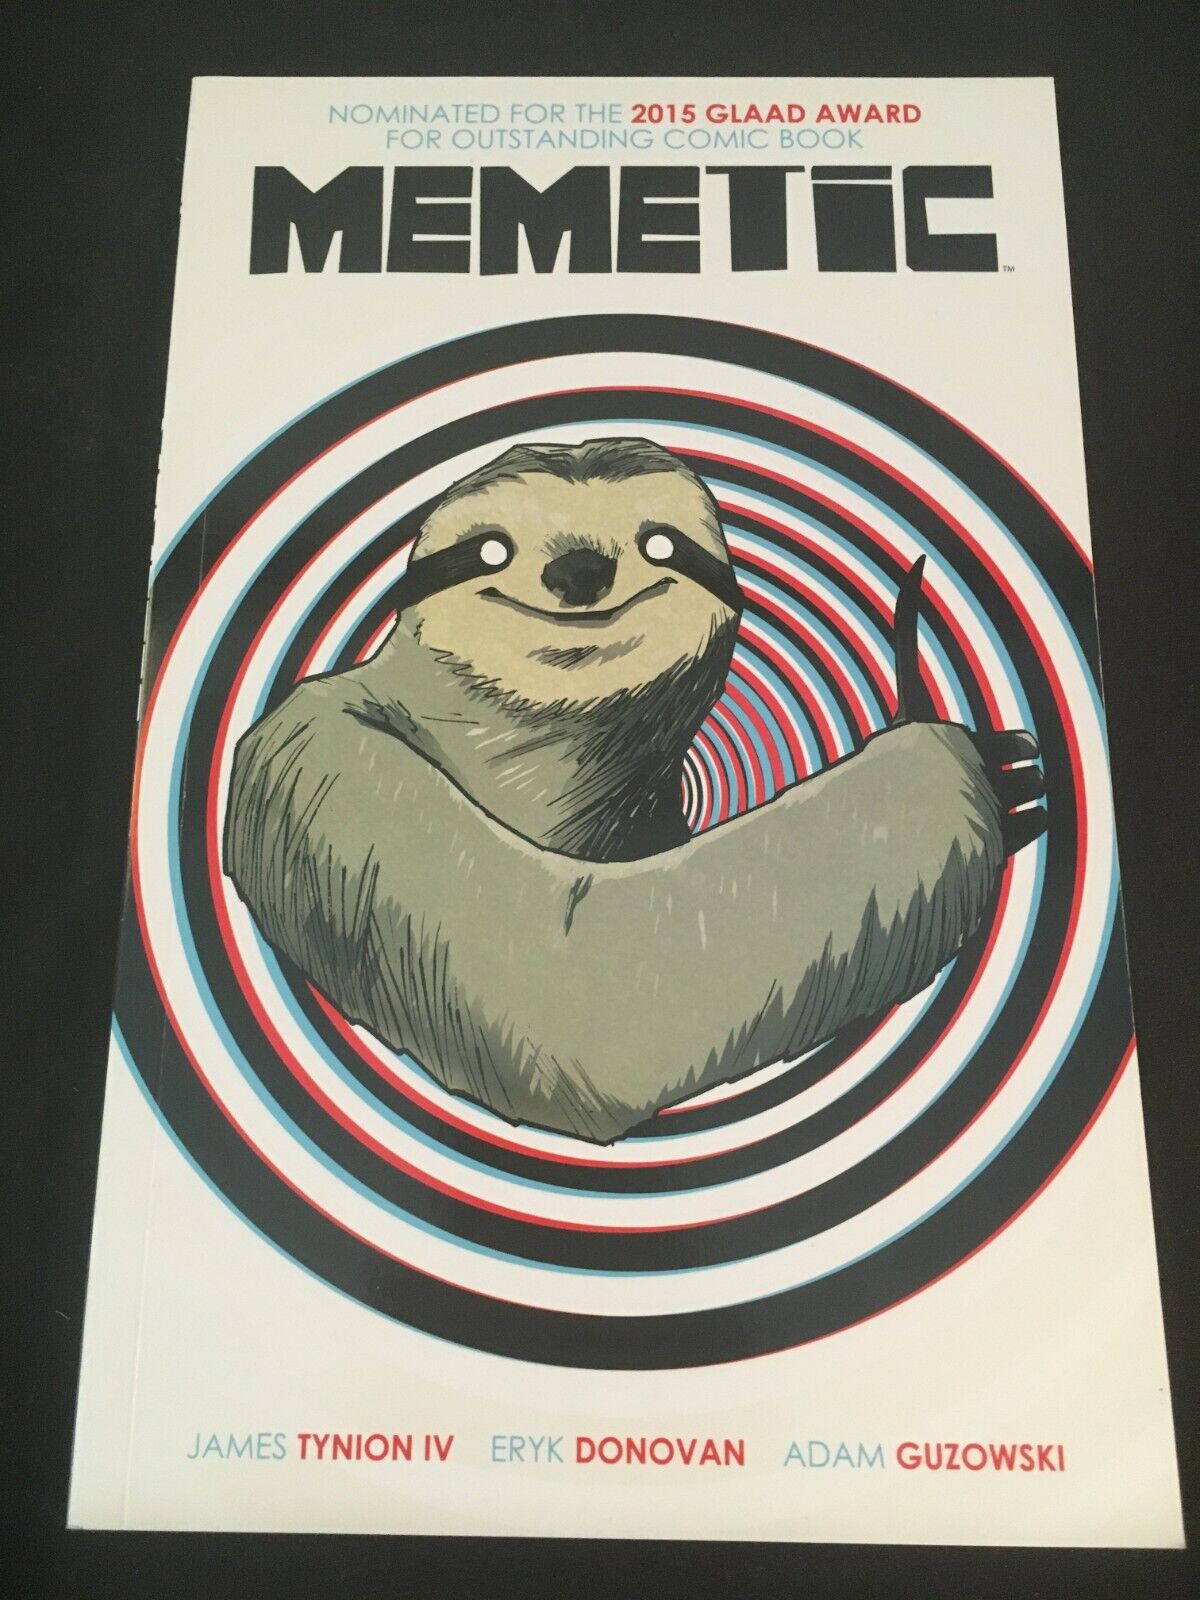 MEMETIC by James Tynion IV, Trade Paperback